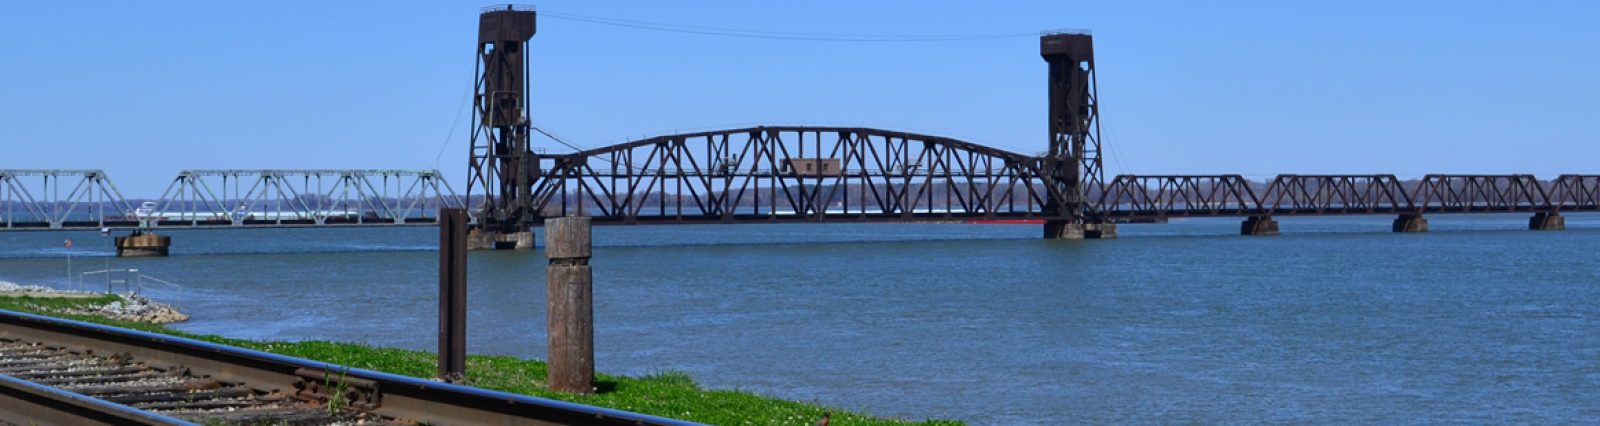 Tennessee Valley Region - Train Bridge over the Tennessee River in Decatur